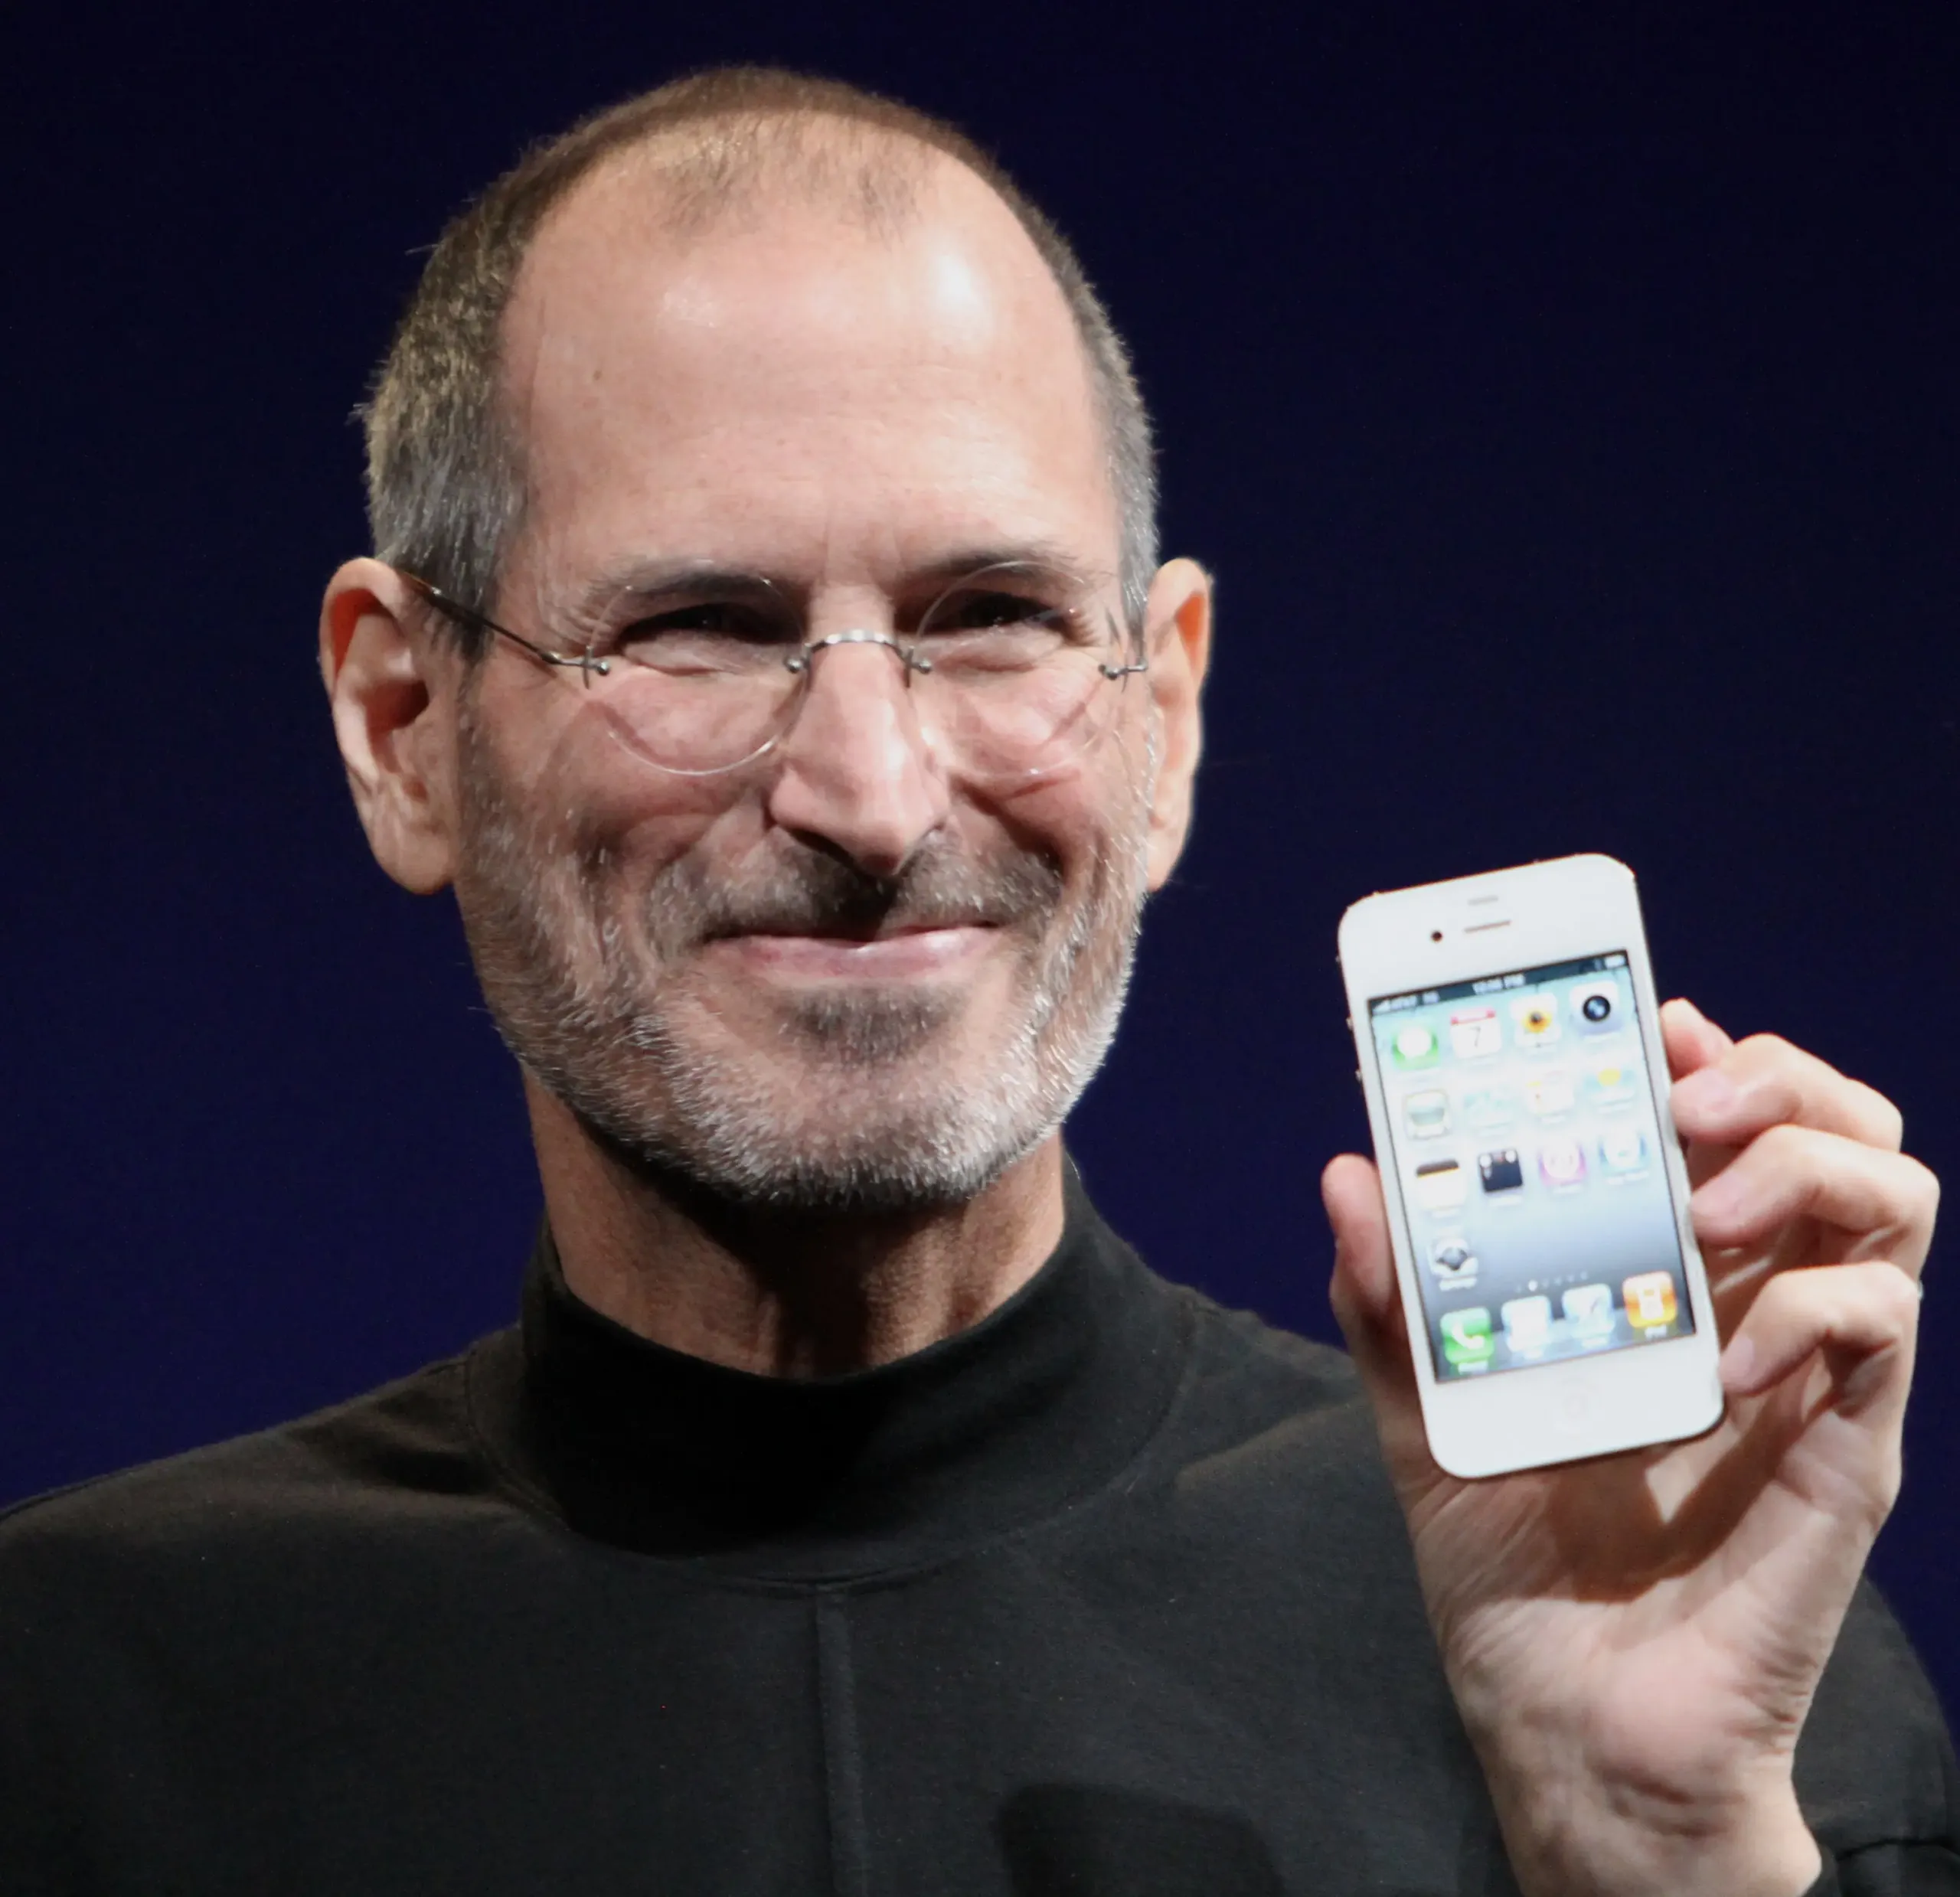 Steve Jobs shows off the iPhone 4 at the 2010 Worldwide Developers Conference.(CC BY-SA 3.0 By Matthew Yohe)